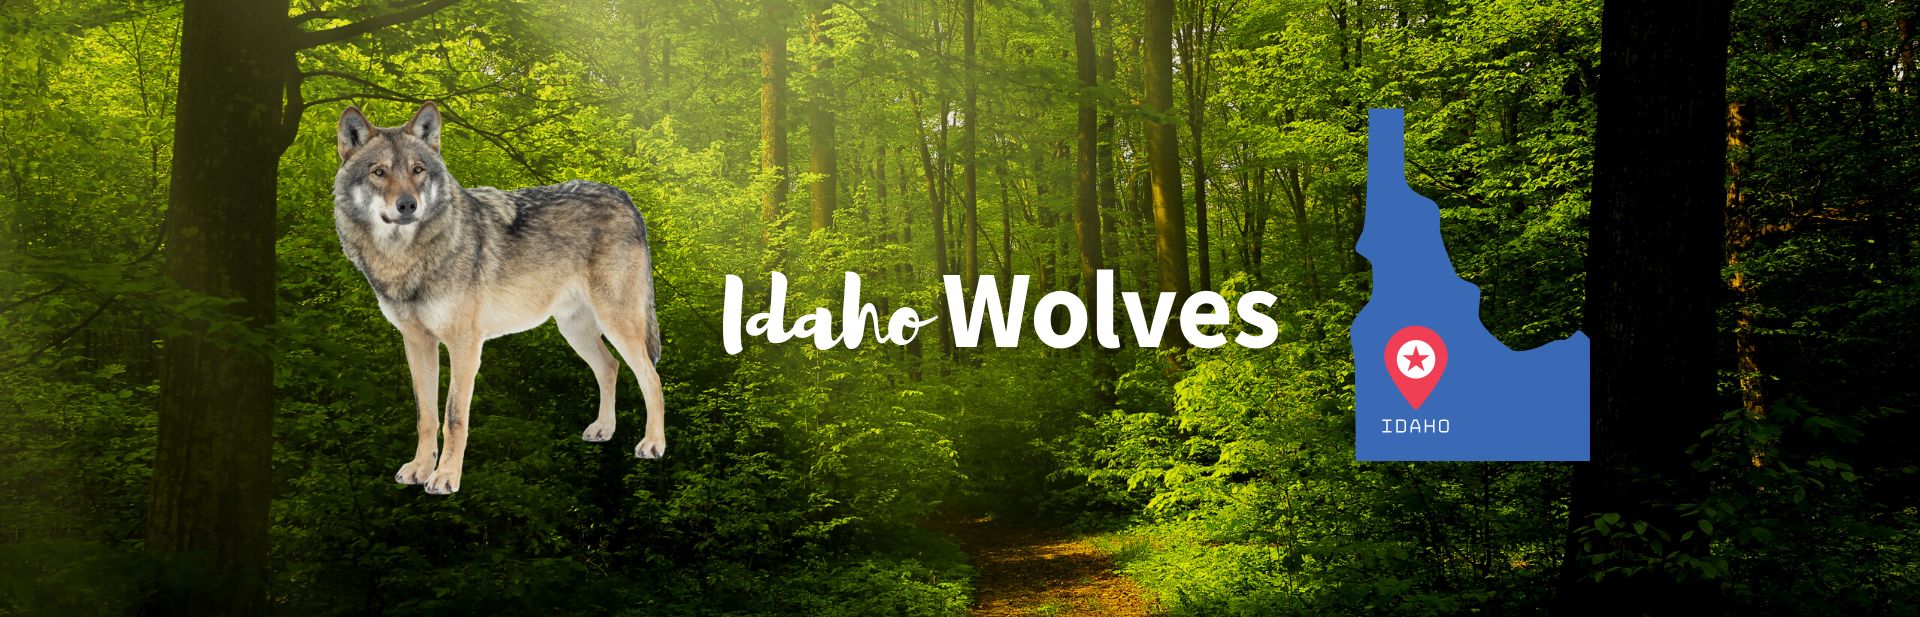 Idaho Wolves: The Challenges and Triumphs of Wildlife Conservation